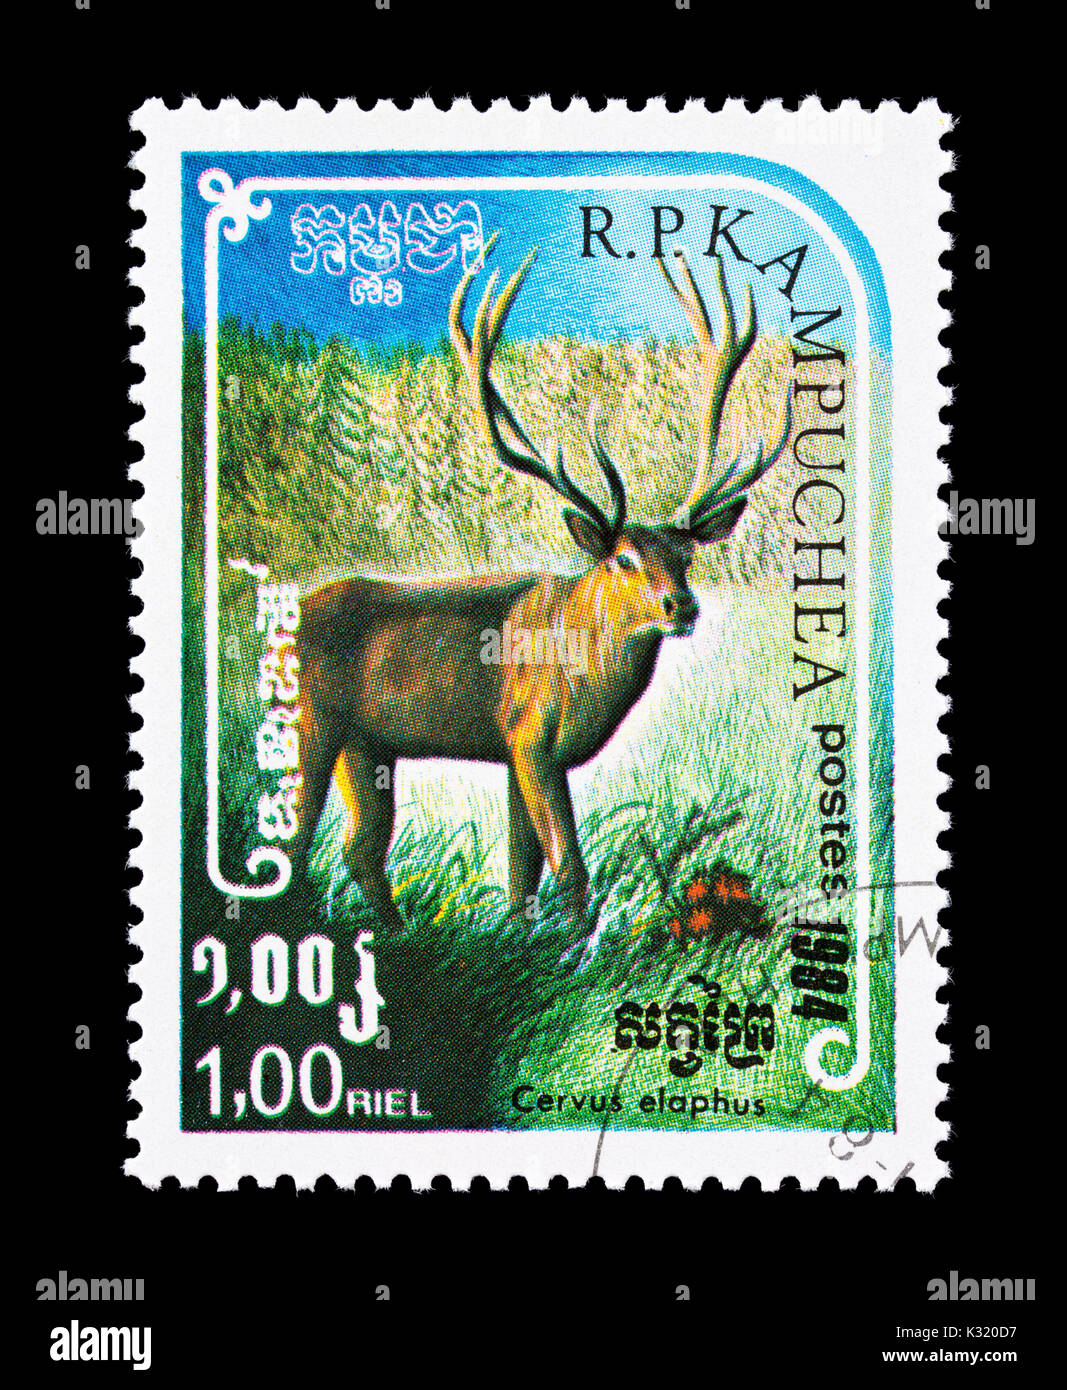 Postage stamp from Cambodia (Kampuchea) depicting a red deer (Cervus elaphus) Stock Photo